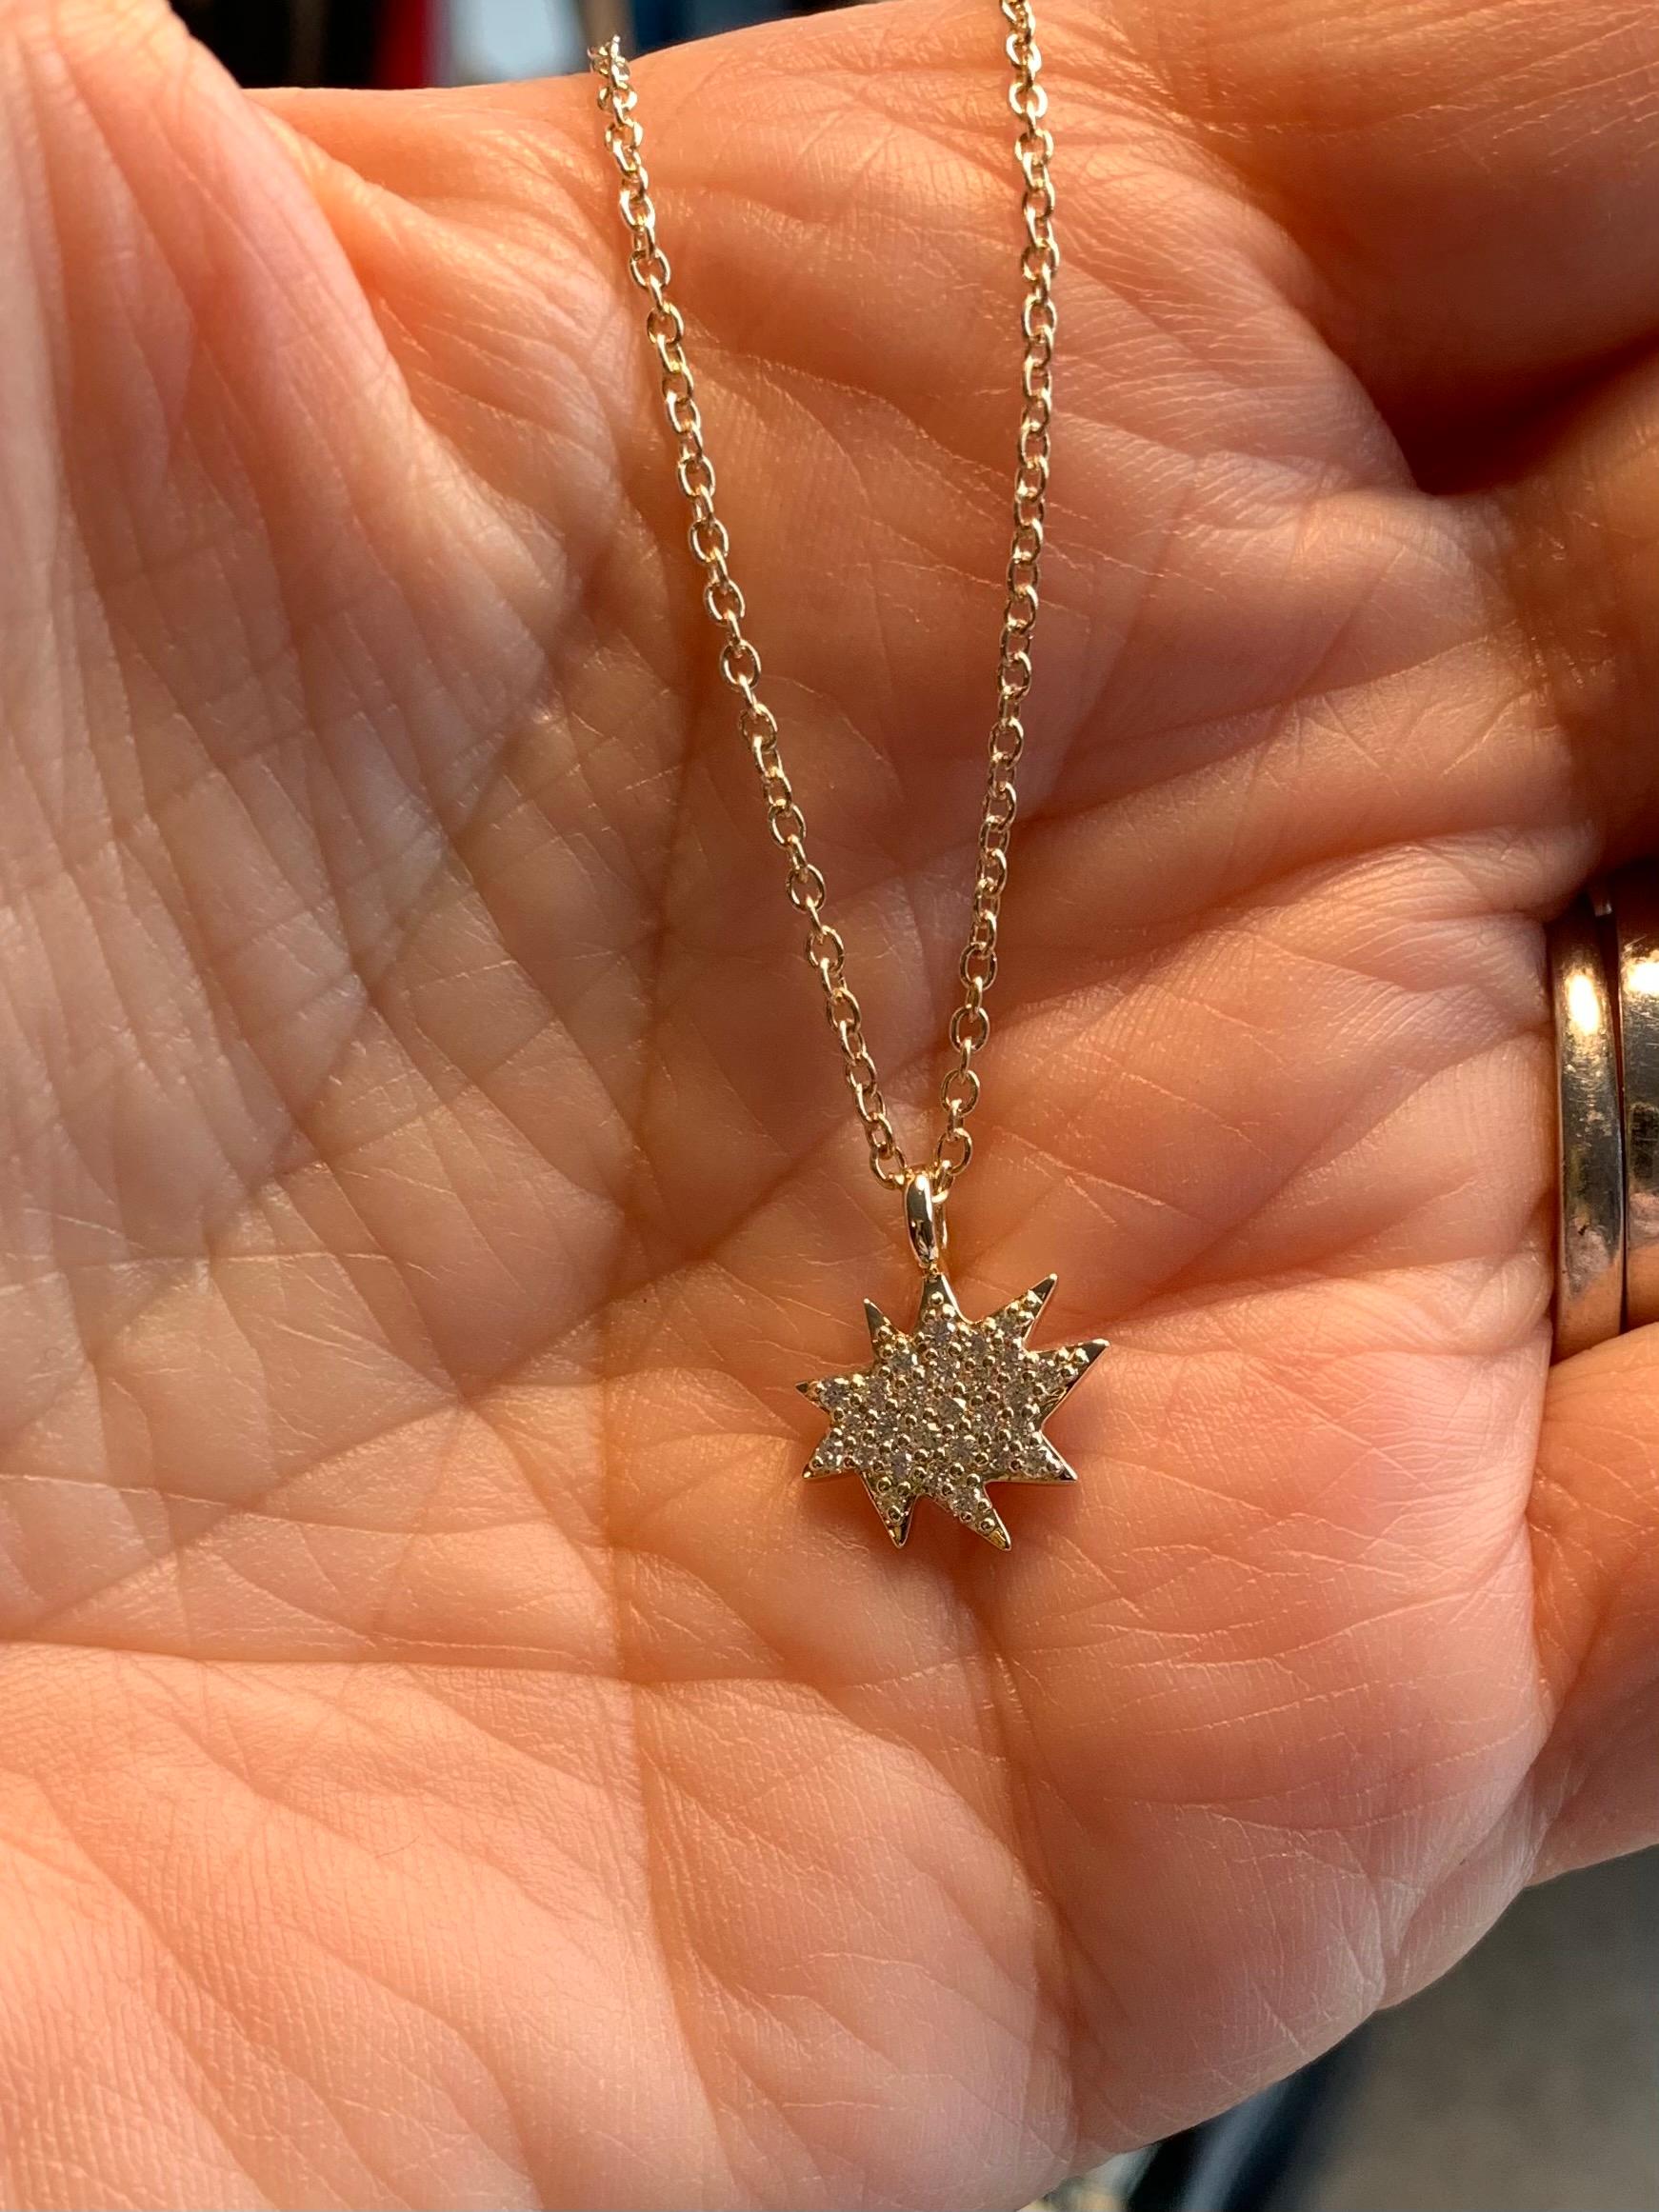 Elegant and adorable! Our Mini Stella Necklace is the perfect piece to layer or wear alone. Our iconic 14k gold organic star in a new delicate size hangs on a 14k gold chain and sparkles with pavé diamonds. Great alone or worn a few at a time!
 
14k